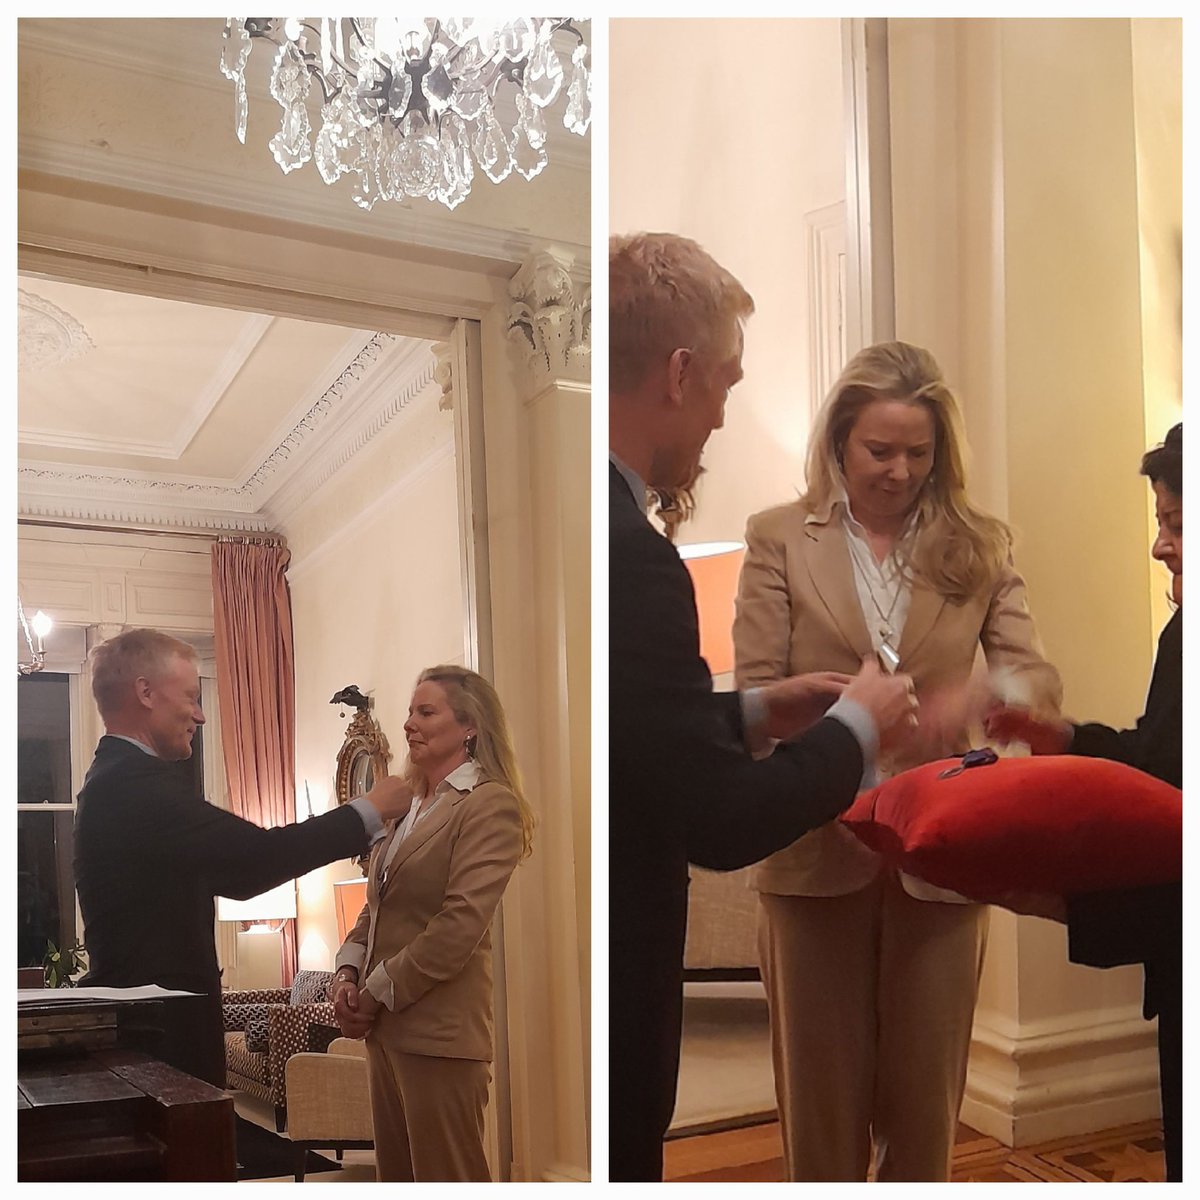 Great honour bestowed onto our #Adeffi @adeffimembre1 president #DervalConroy who was awarded the Chevalier des Palmes académiques title @AmopaIrlande by his Excellency @vincentguerend 
#amopa 
#Frenchstudies 
#ucd 
@UCD_Research